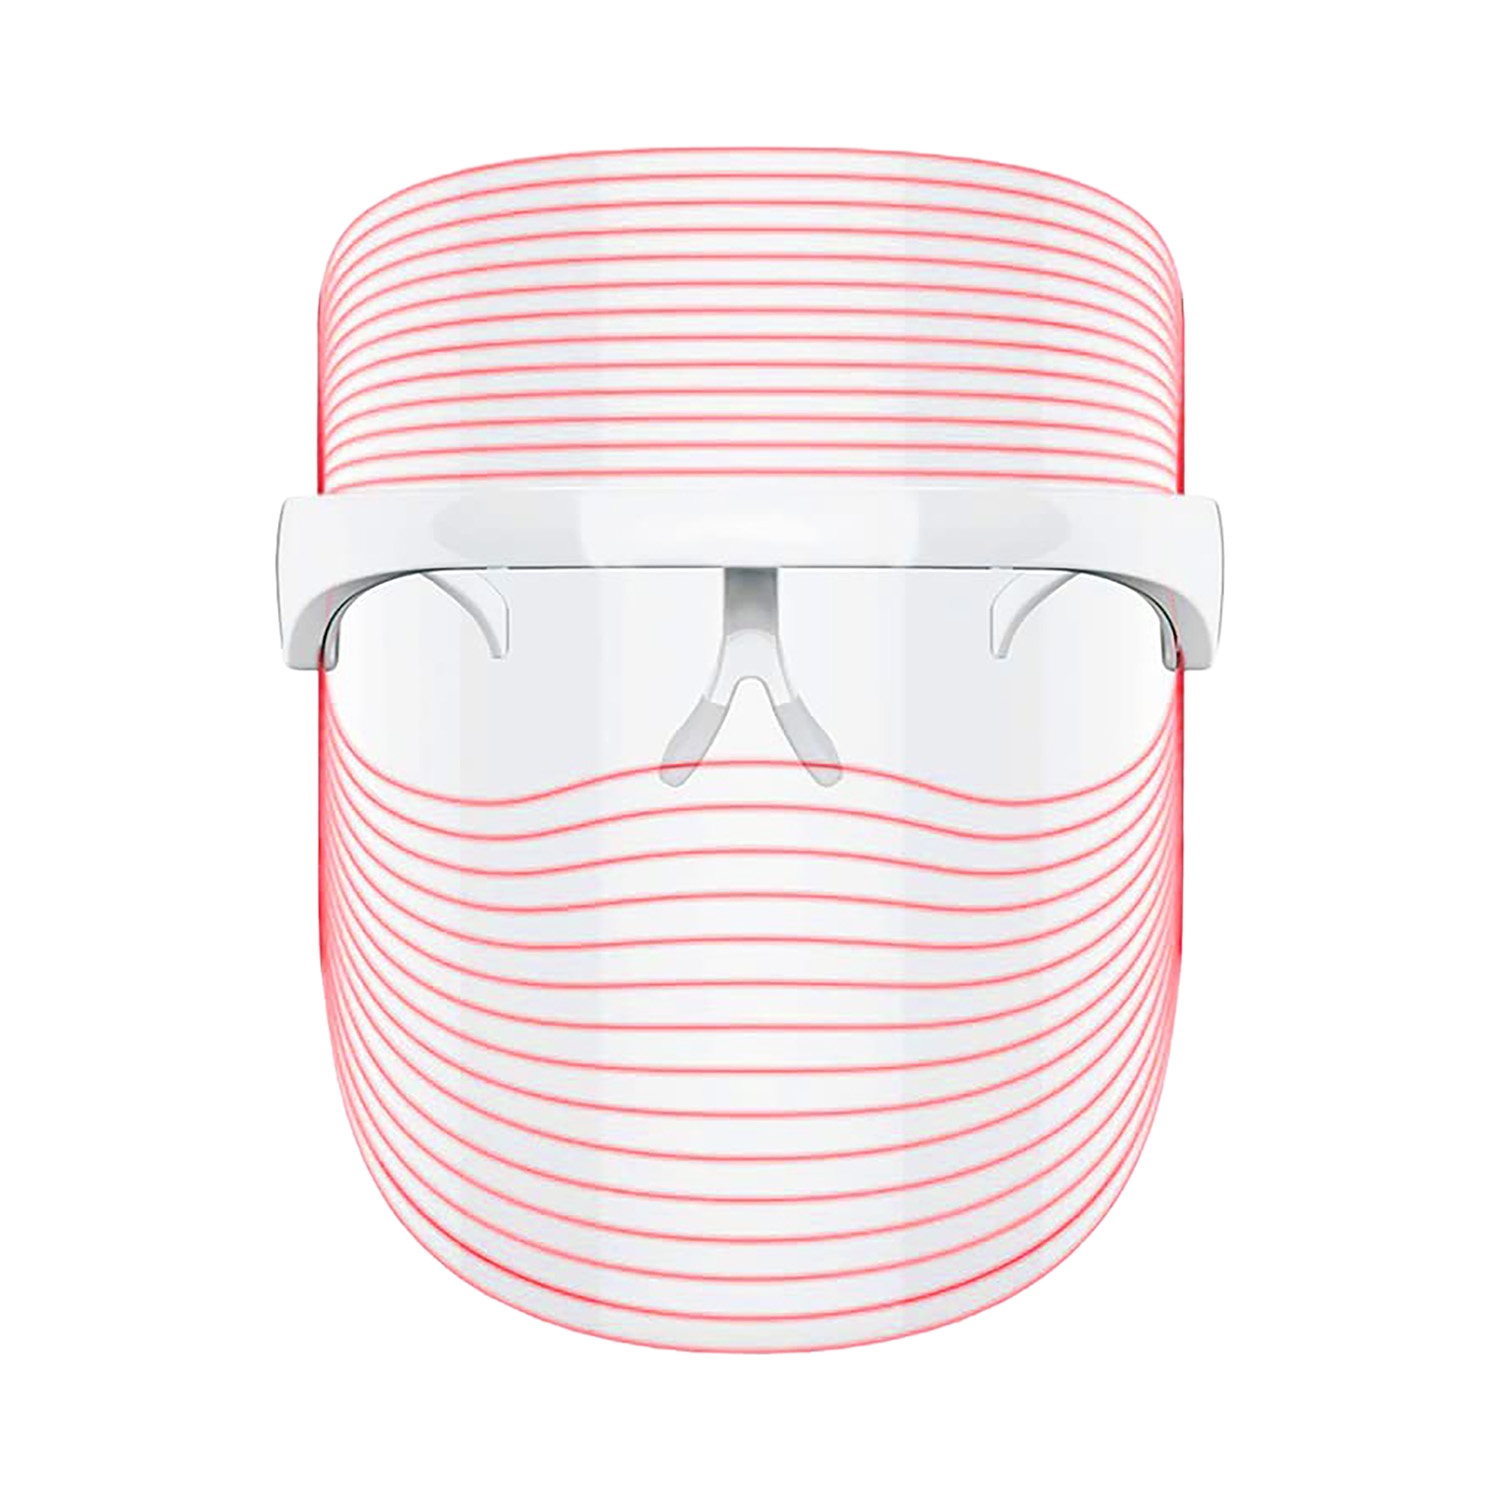 Protouch | Protouch 3 In 1 LED Face Mask